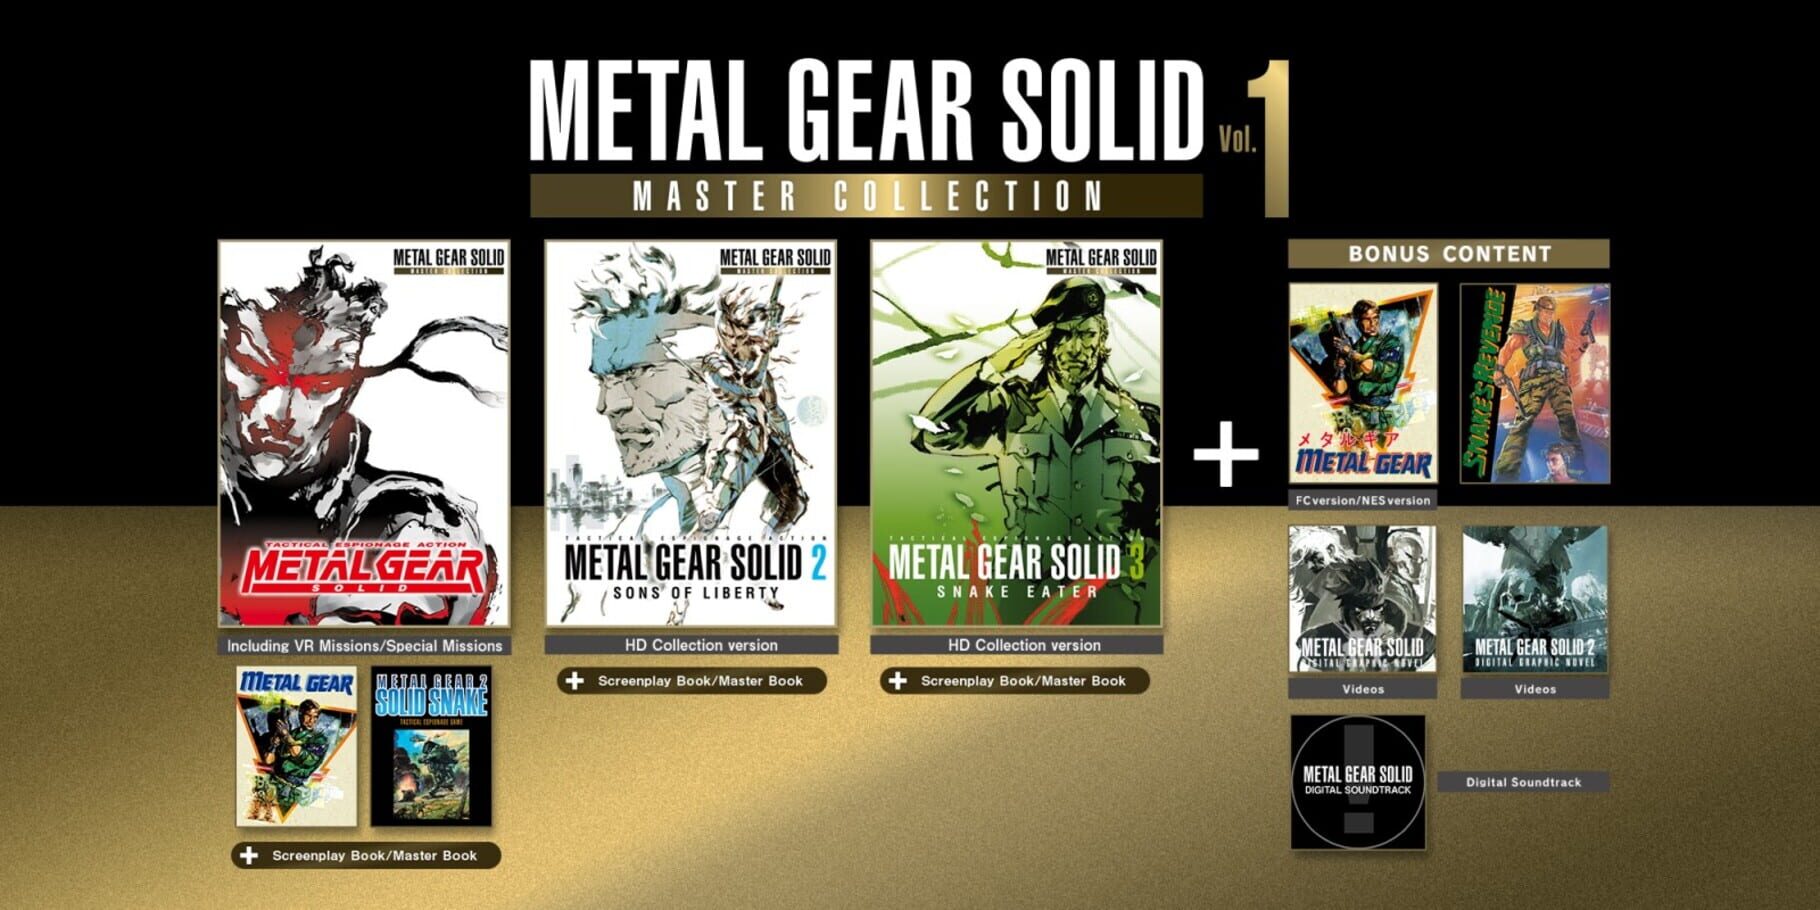 Metal Gear Solid Master Collection: Volume 1 artwork